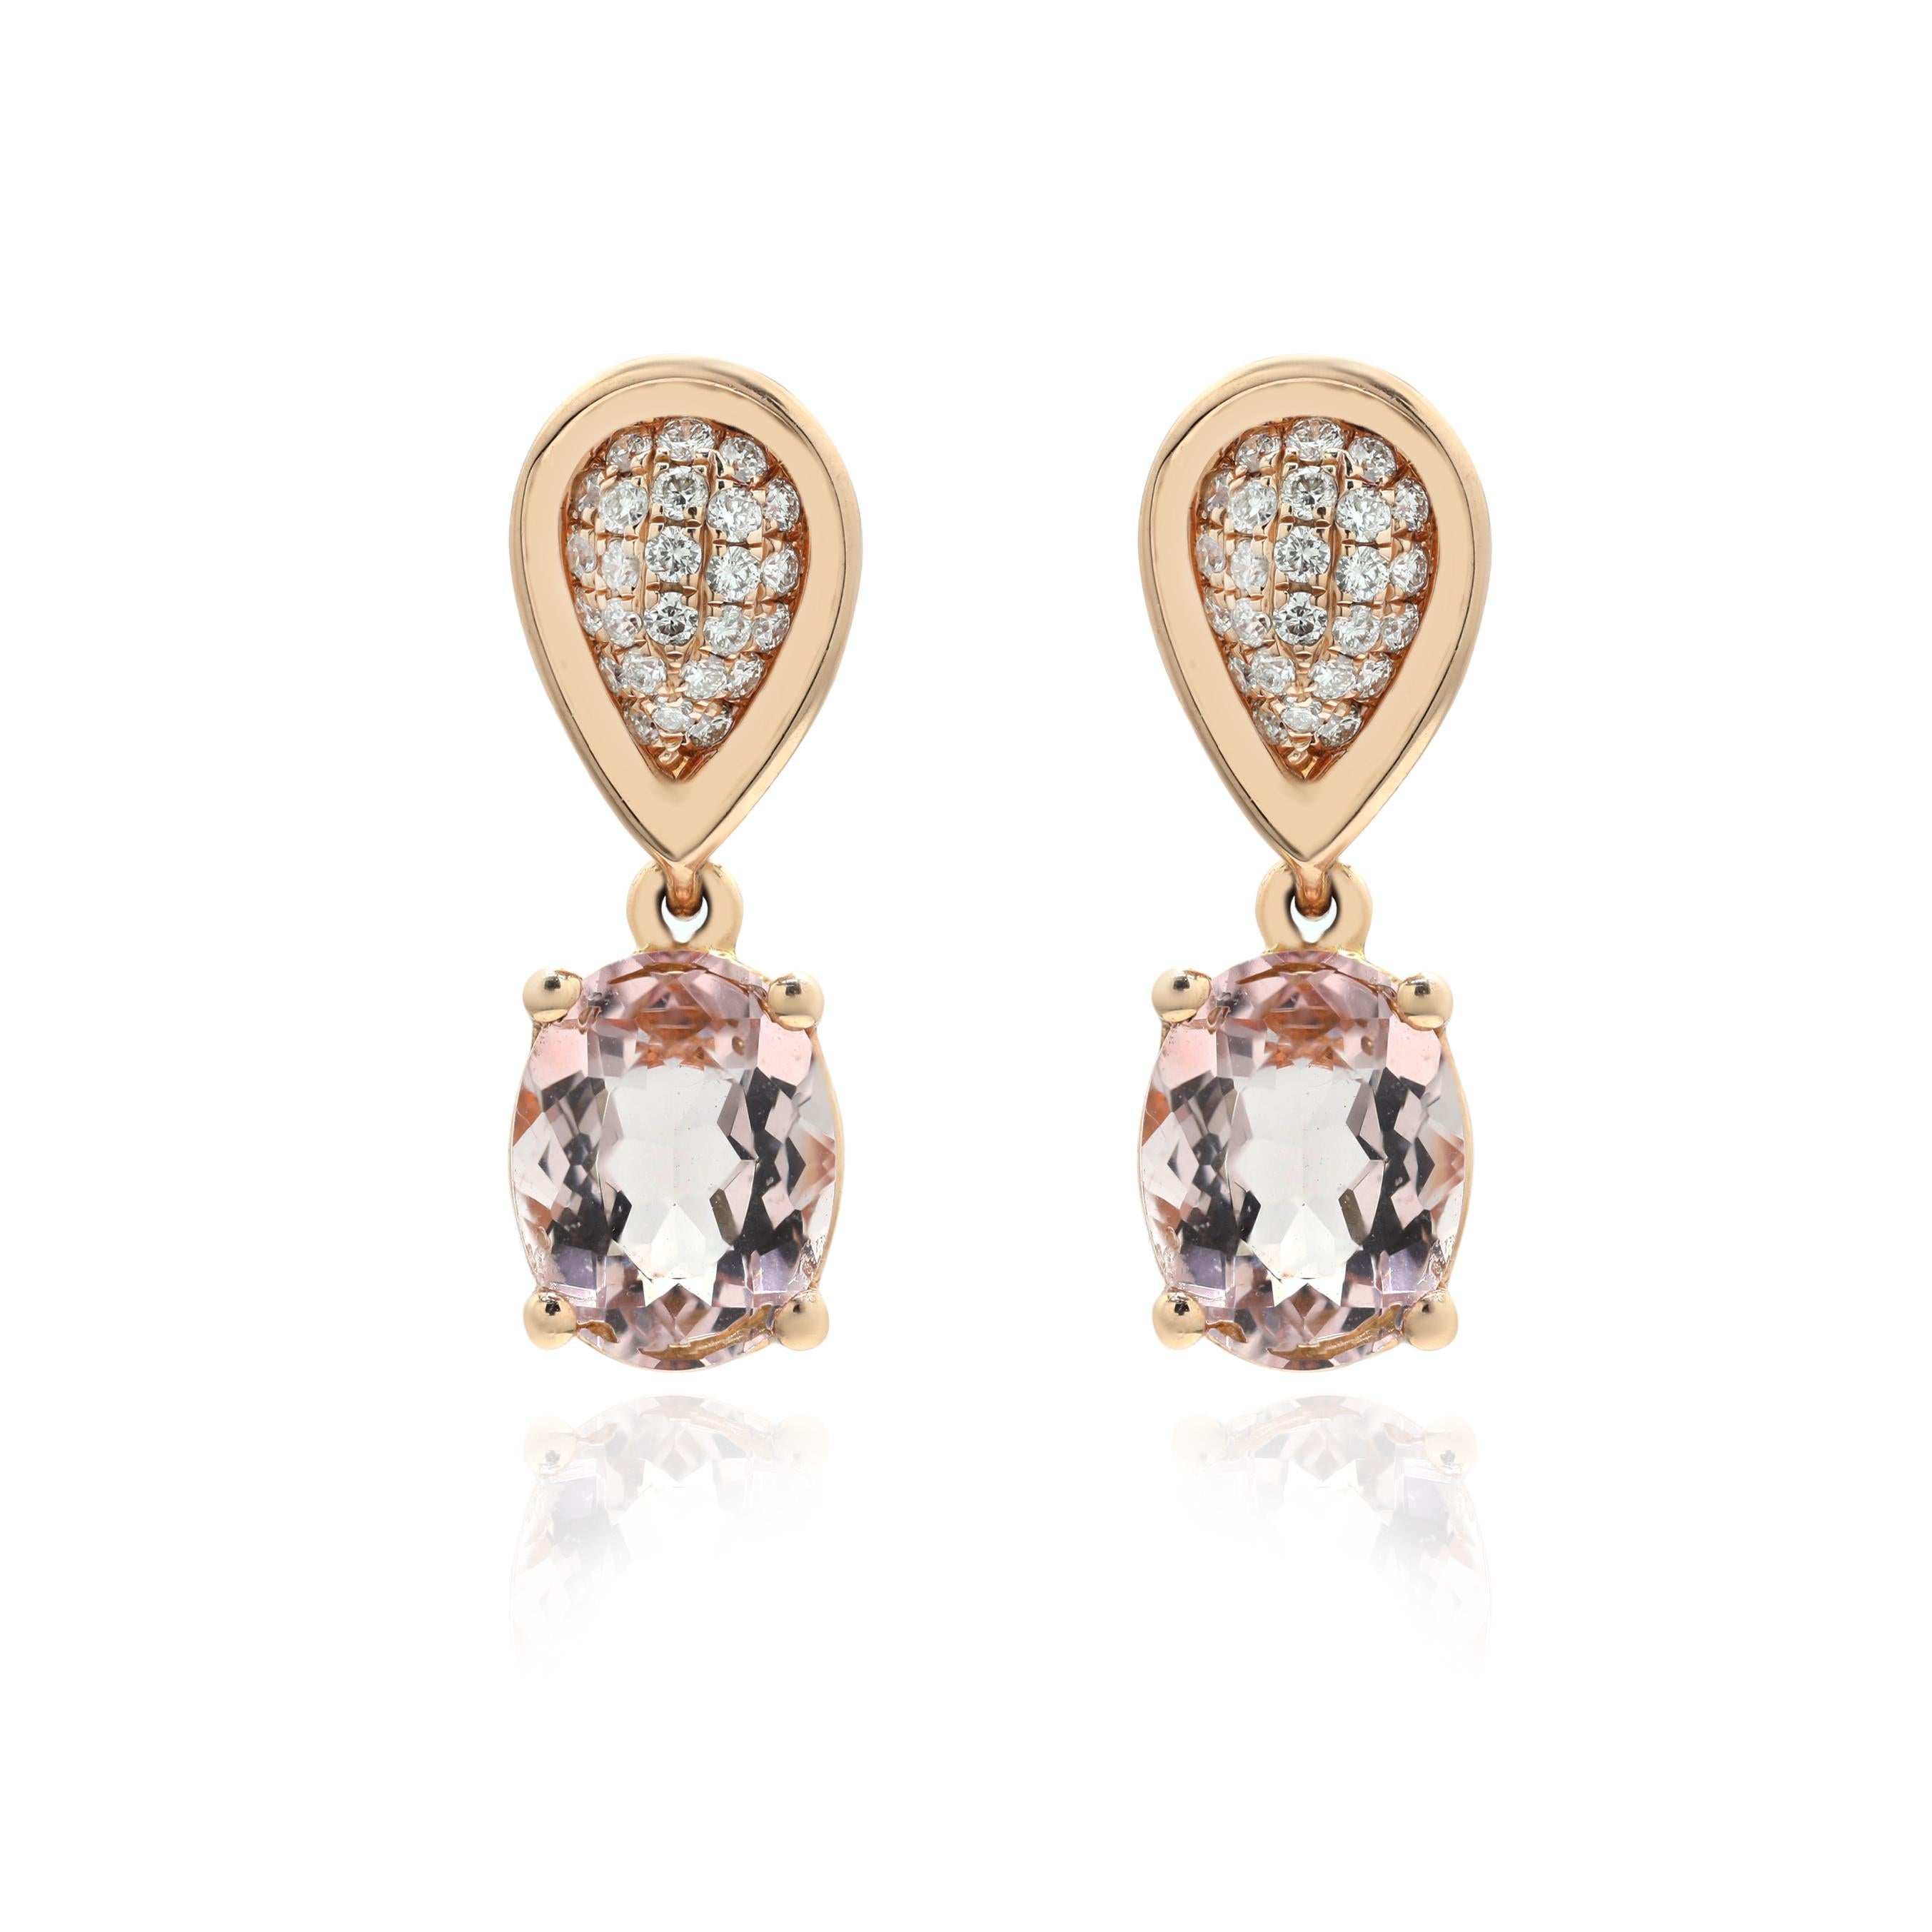 Rose quartz and Diamond Dangle Earrings to make a statement with your look. These earrings create a sparkling, luxurious look featuring oval cut gemstone.
If you love to gravitate towards unique styles, this piece of jewelry is perfect for